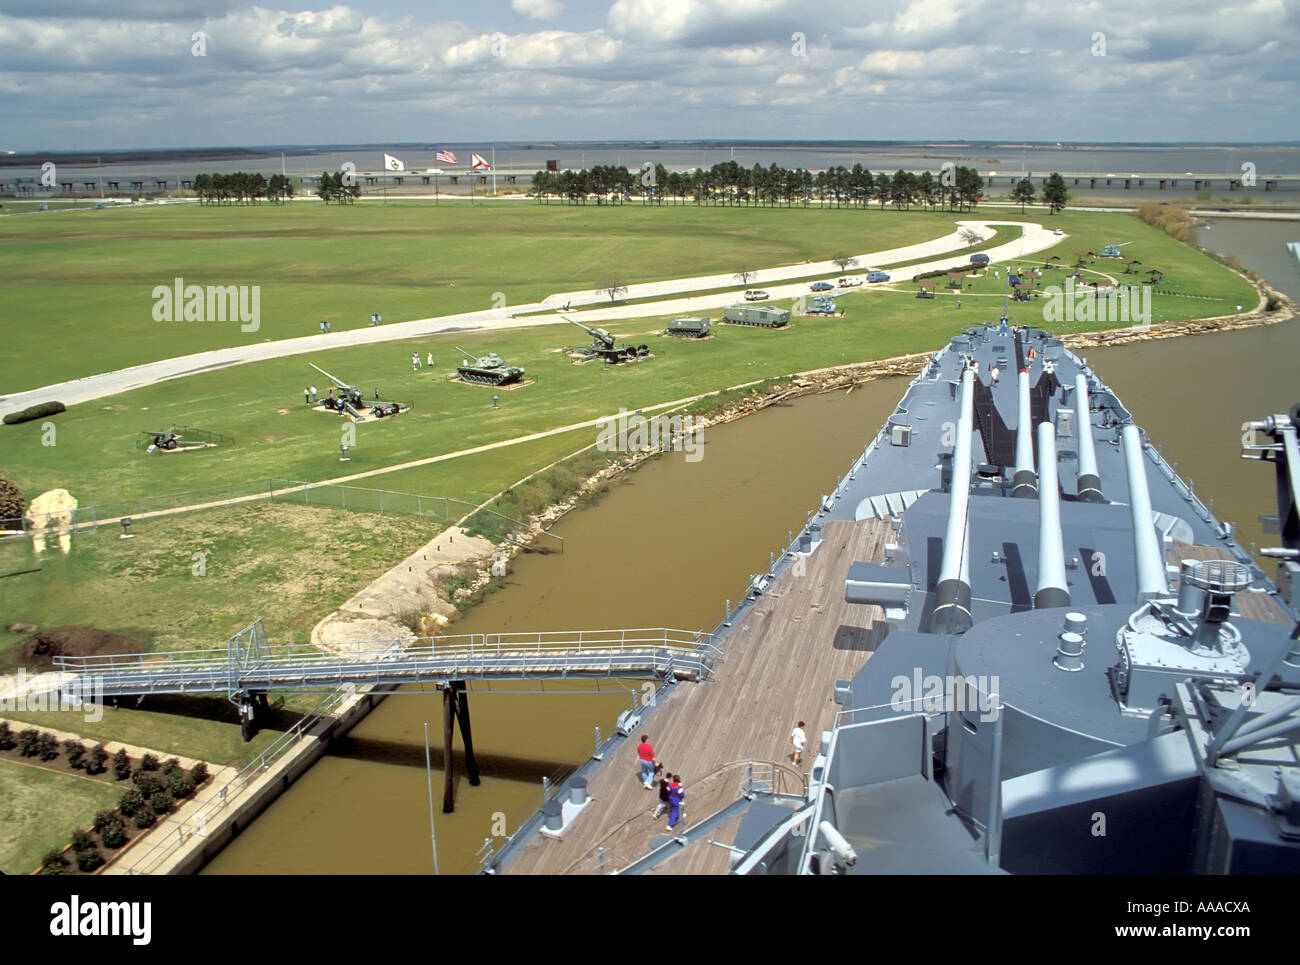 Naval war museum including the USS Alabama at Mobile Alabama AL on Mobile Bay Stock Photo